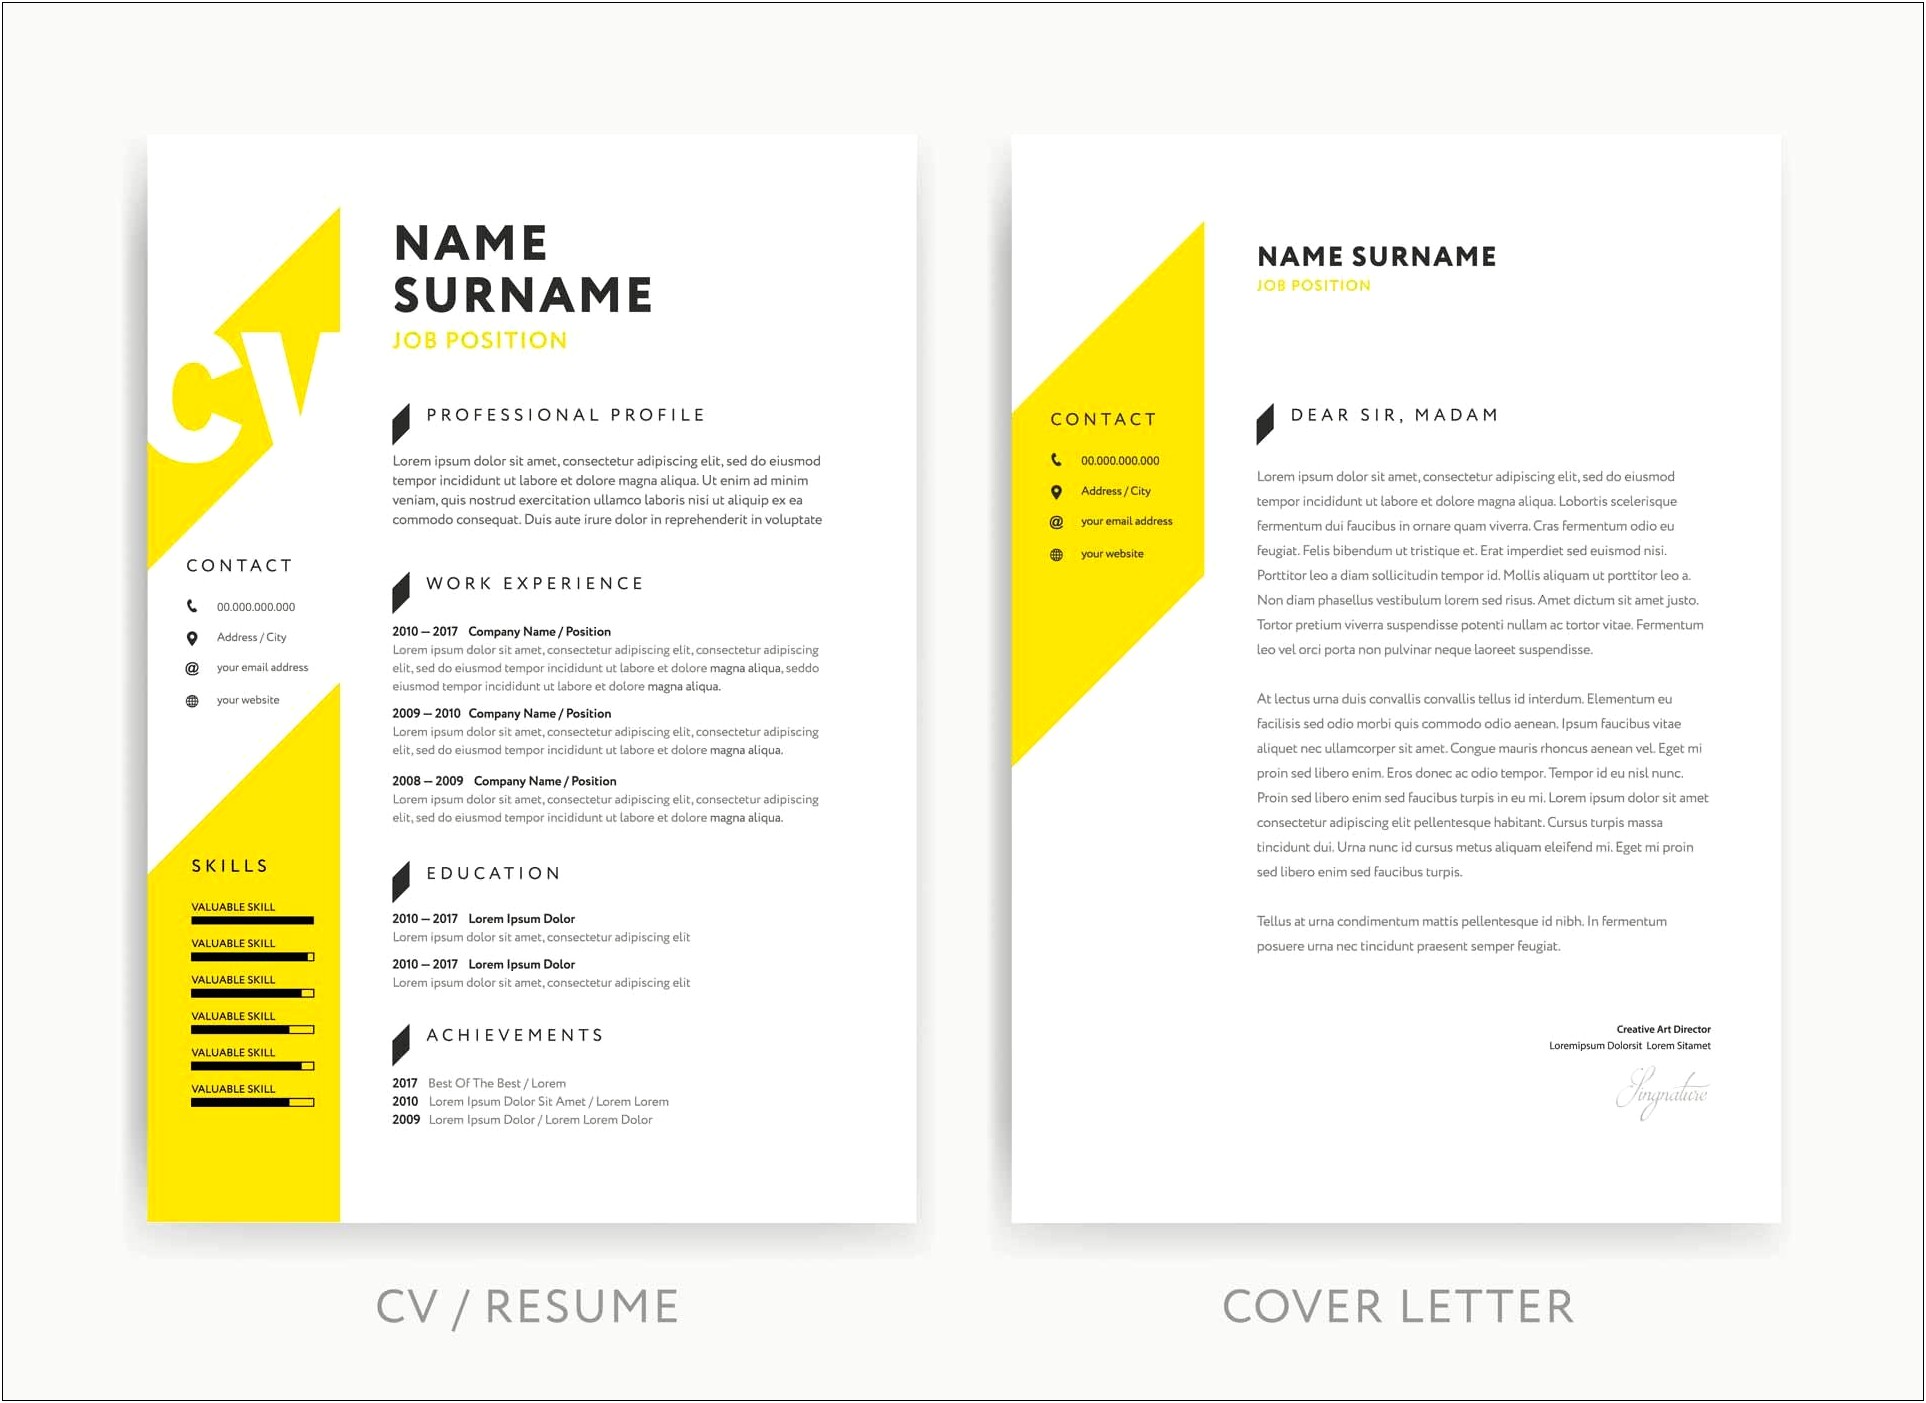 Cover Letter And Resume Email Title